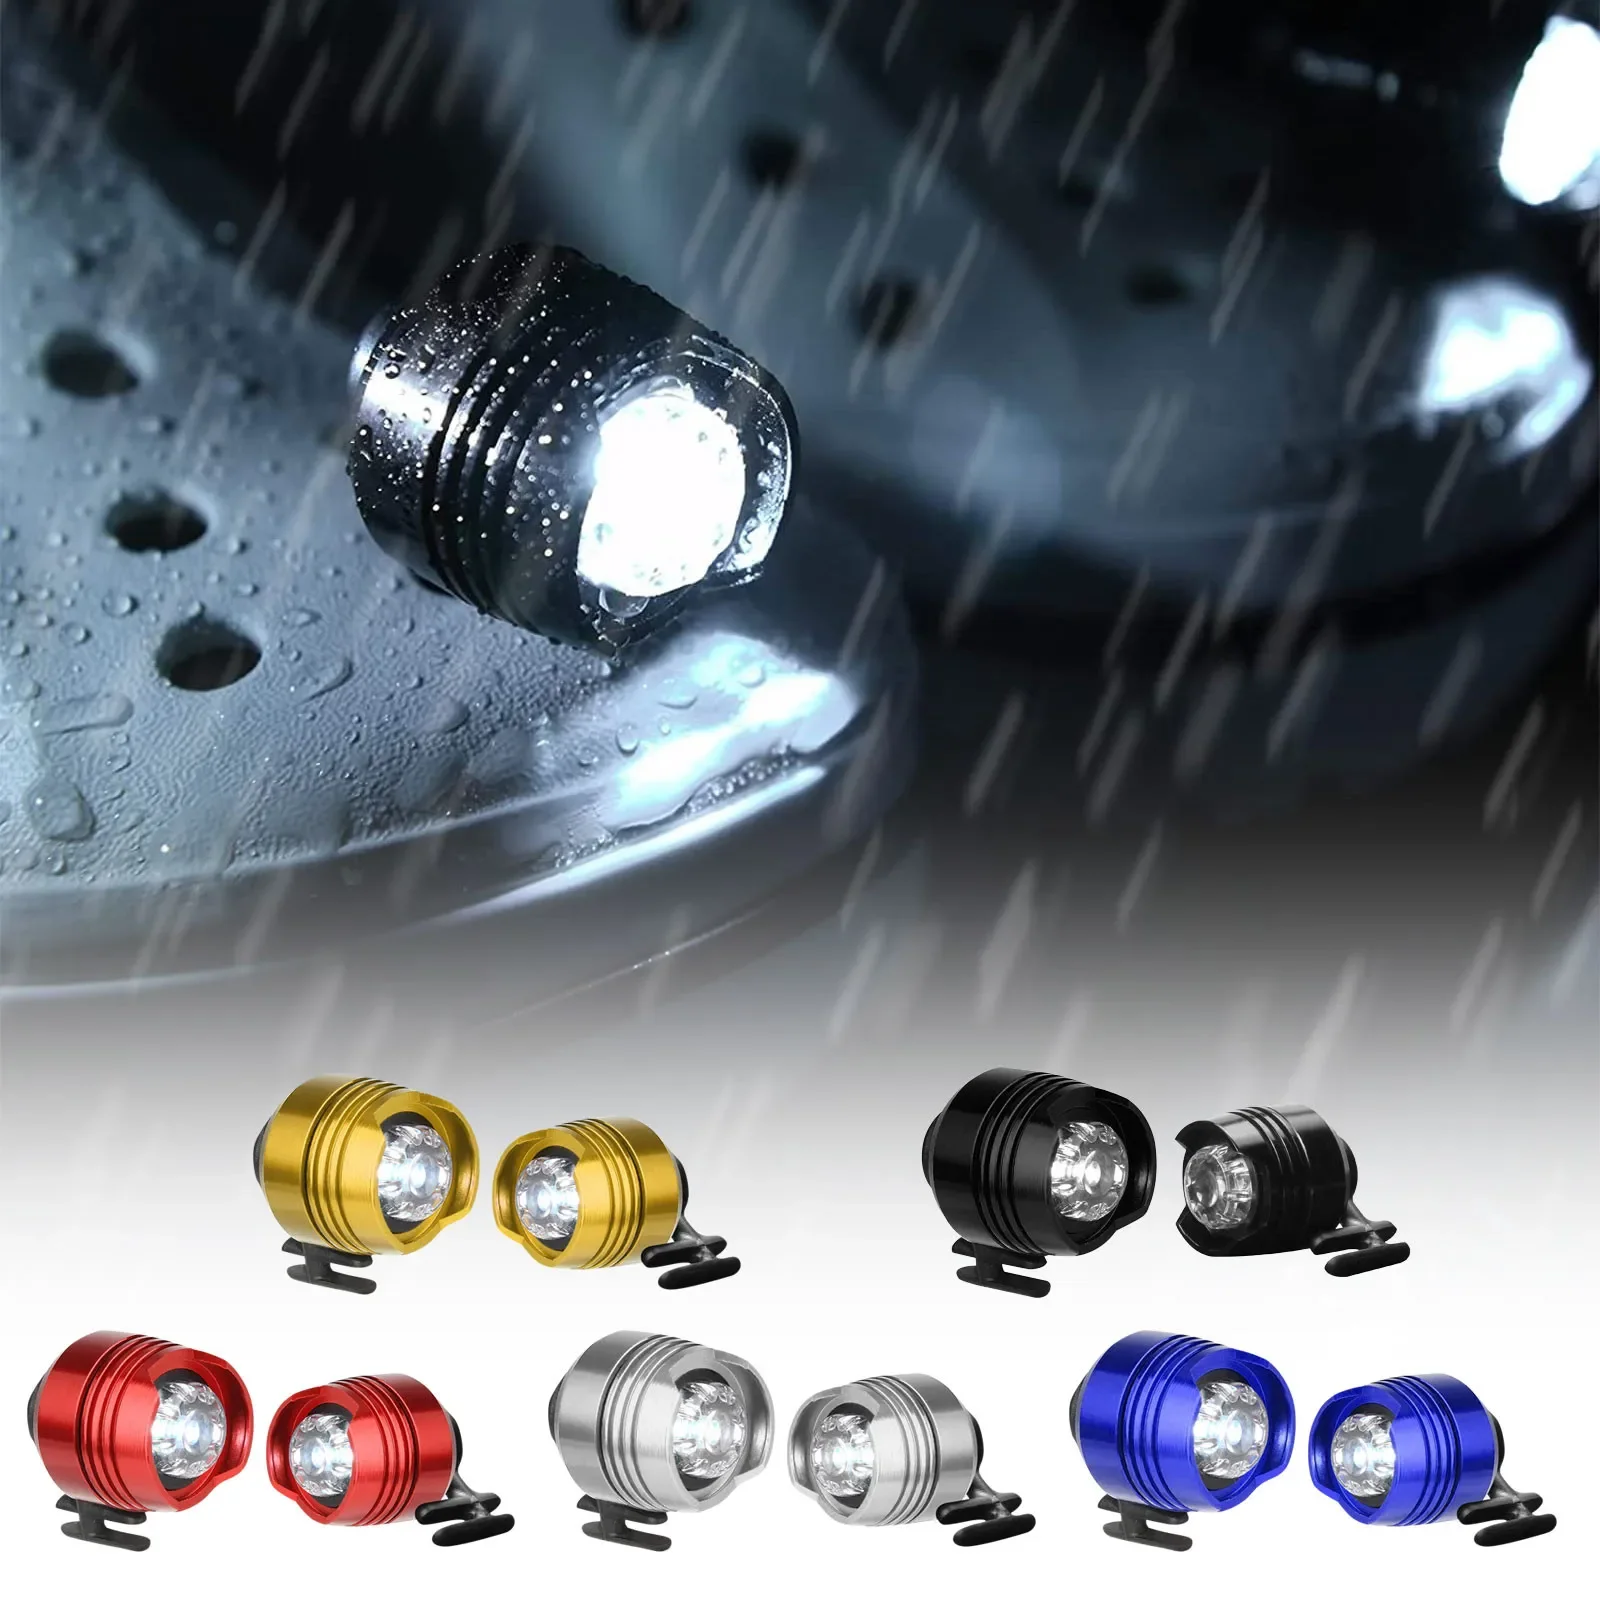 Ocs led light for crocs ipx5 waterproof shoes lights outdoor camping hiking accessories thumb200